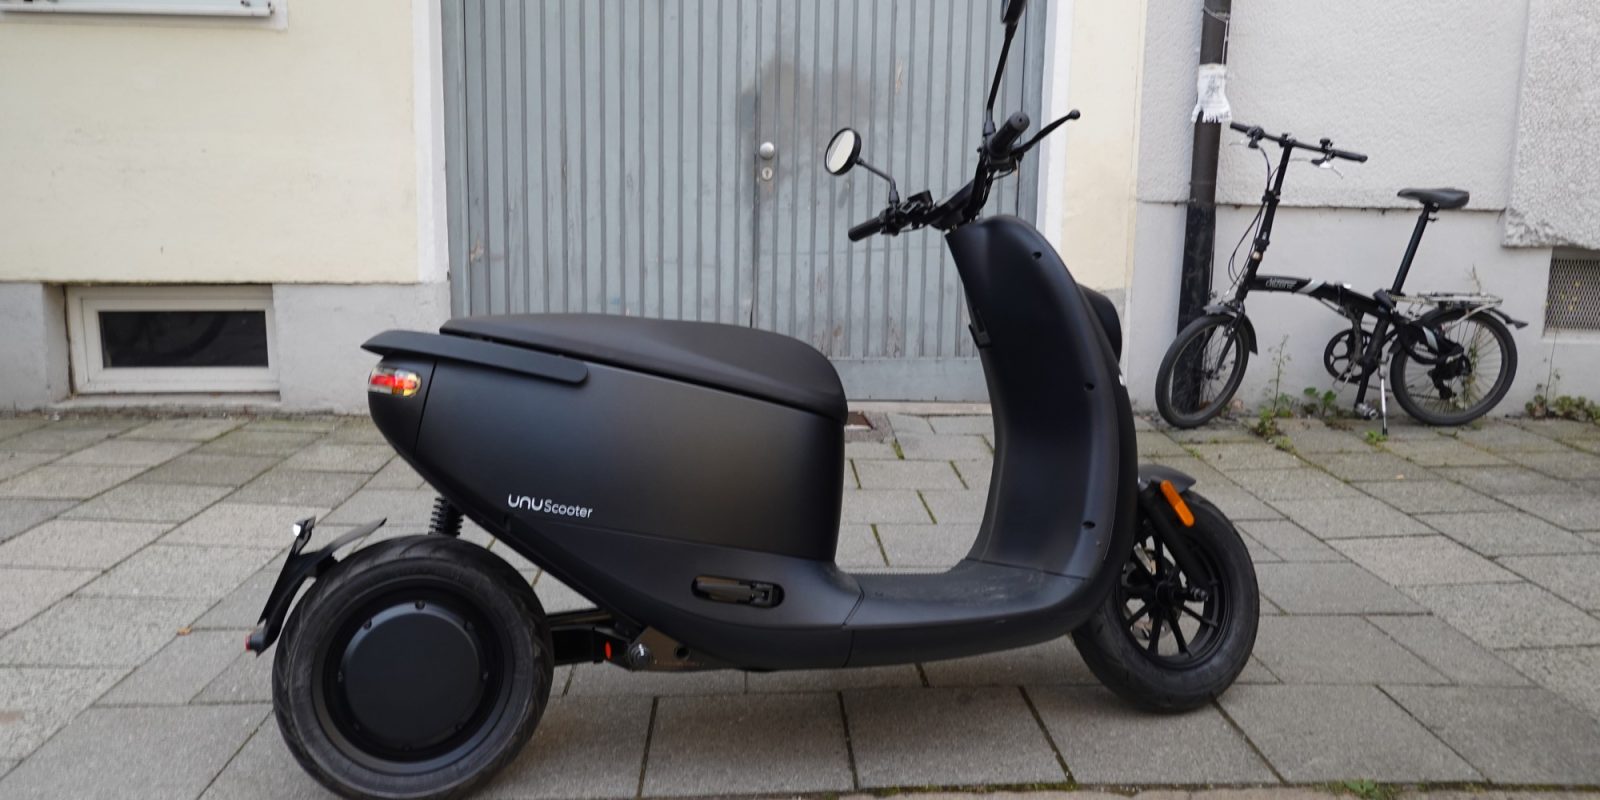 electric scooter review: Electrek's Eurotrip the city scooter!